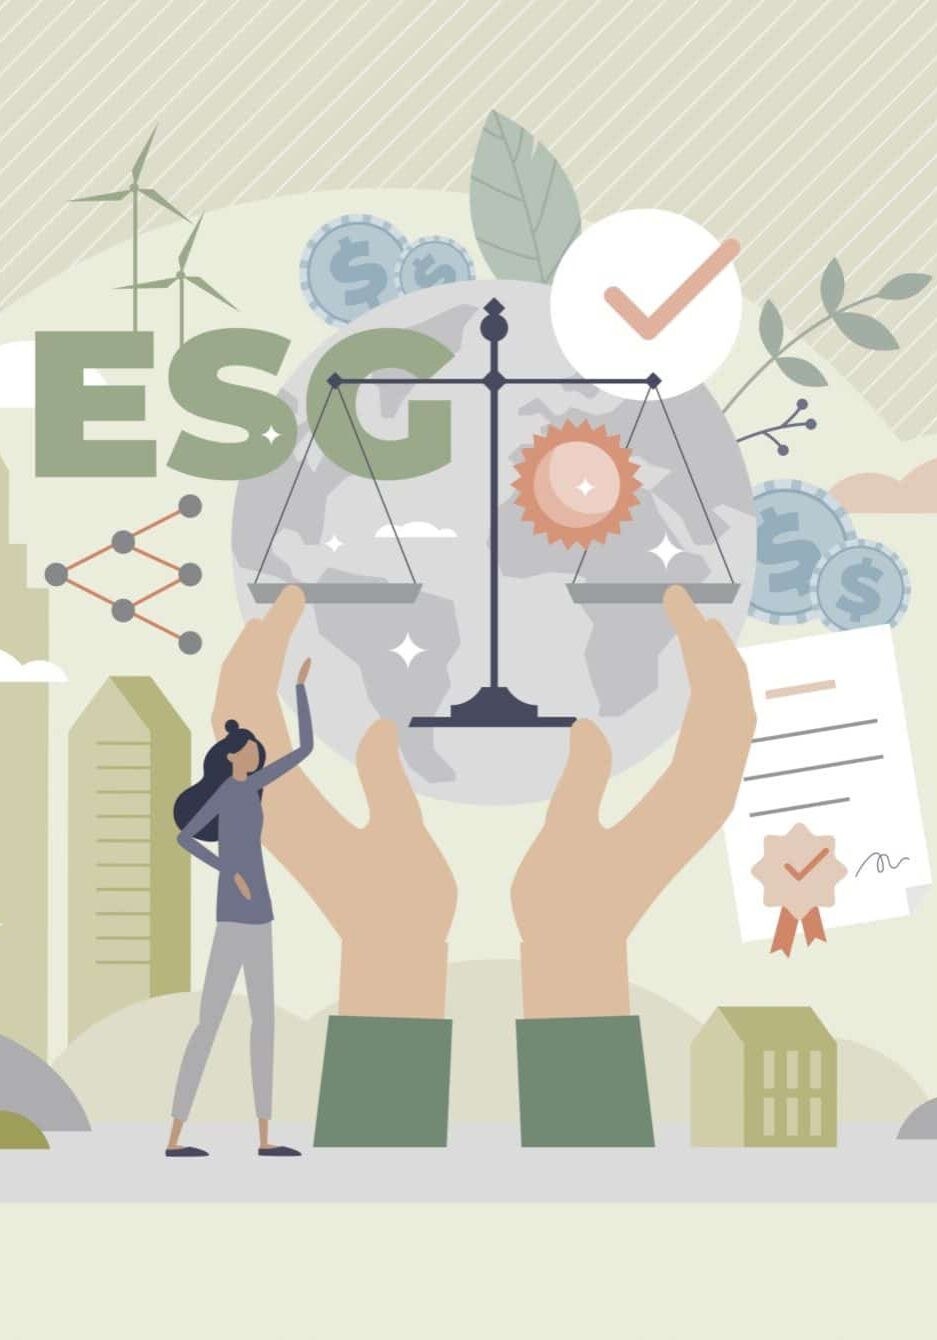 With ESG continuing to dominate the agenda, companies are investing resources into how to effectively embed ESG into their business models. GoodCorporation offers a range of services to help businesses access growing ESG funds